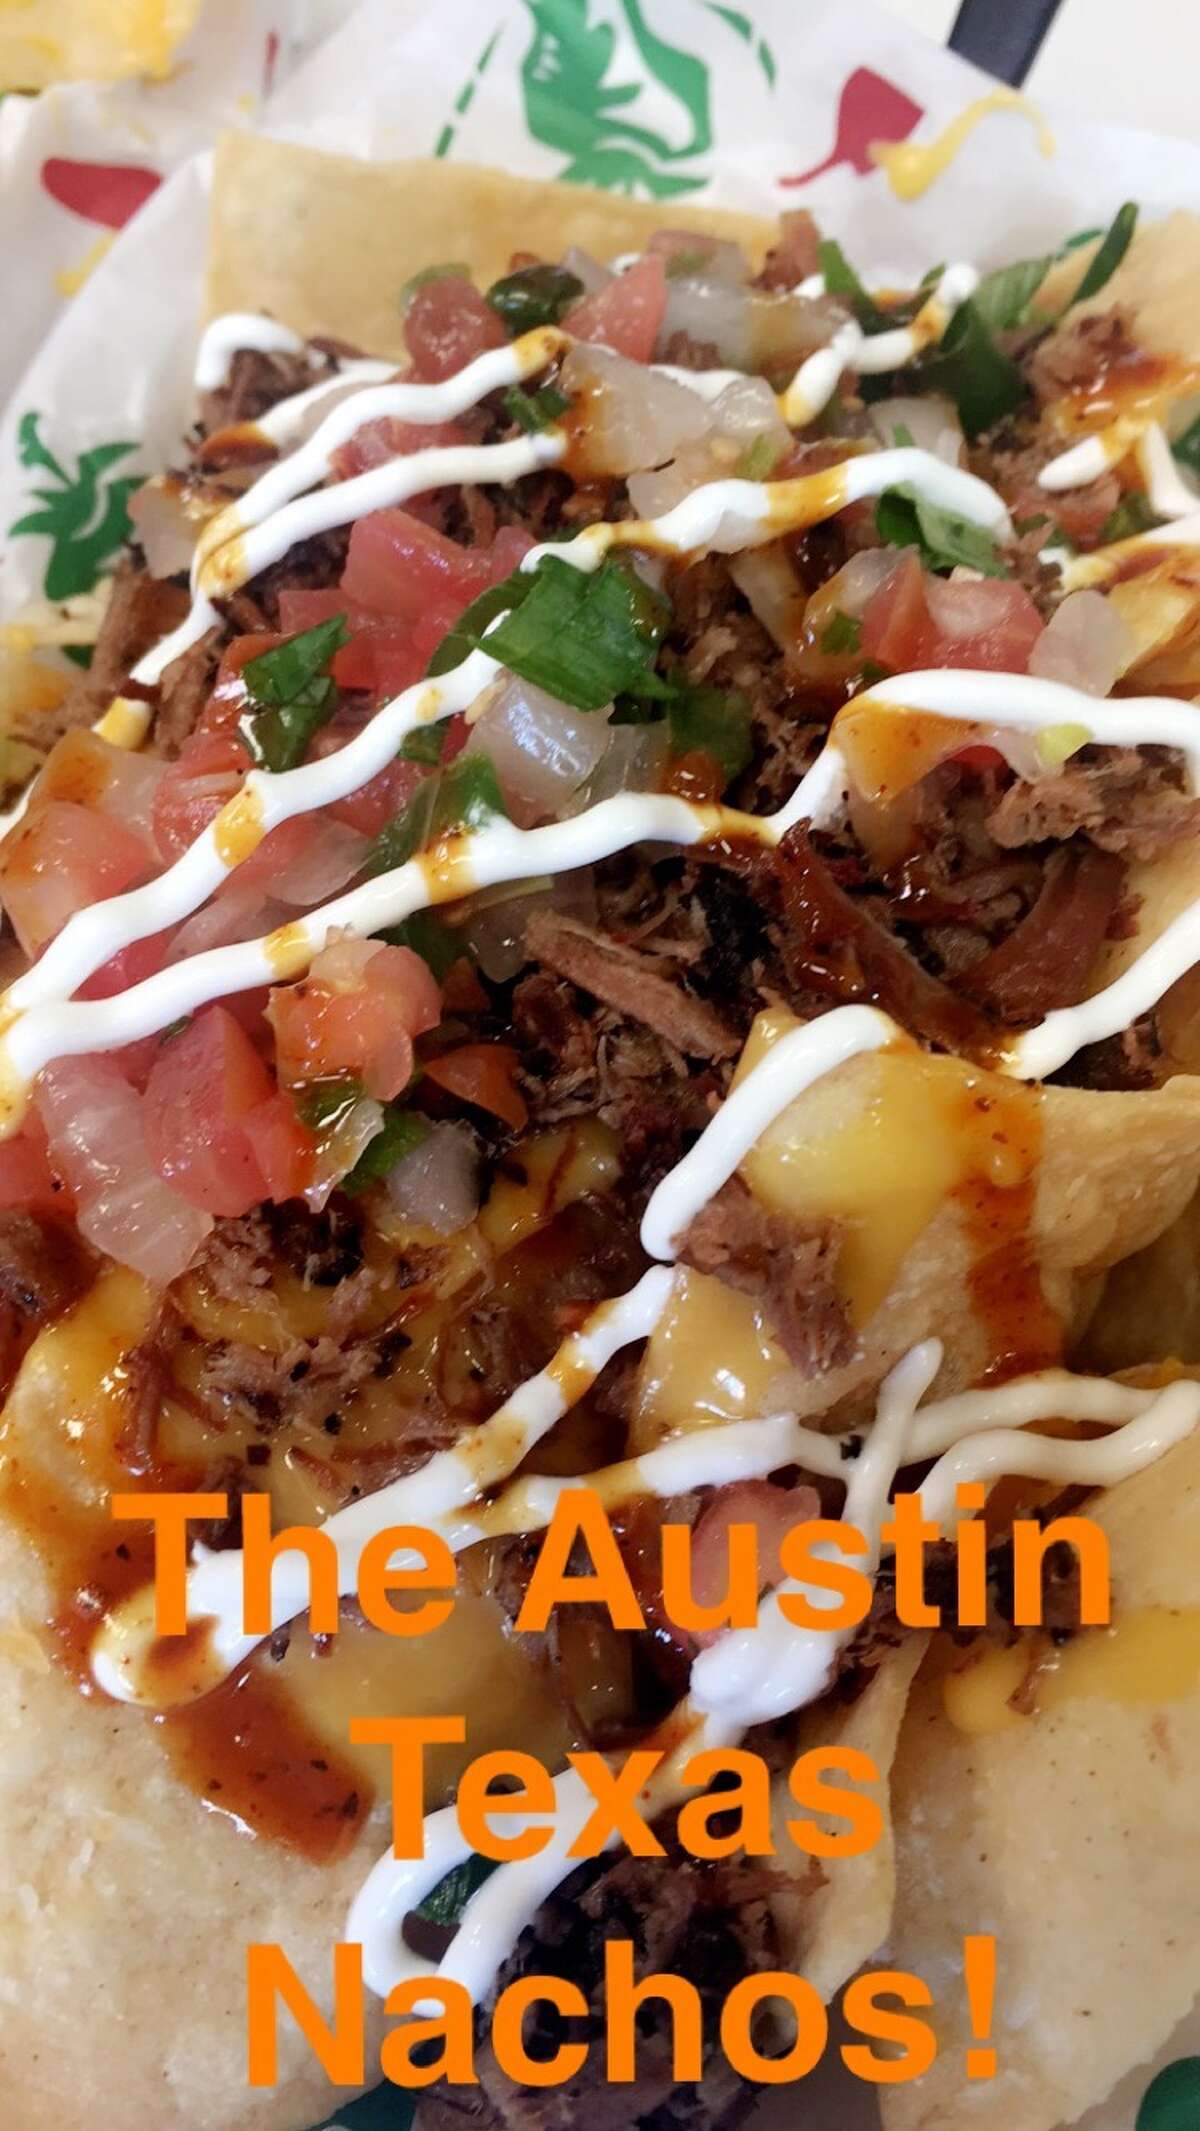 Nacho Centric Nacho Nachos Food Truck Opening Brick And Mortar In Pearland 